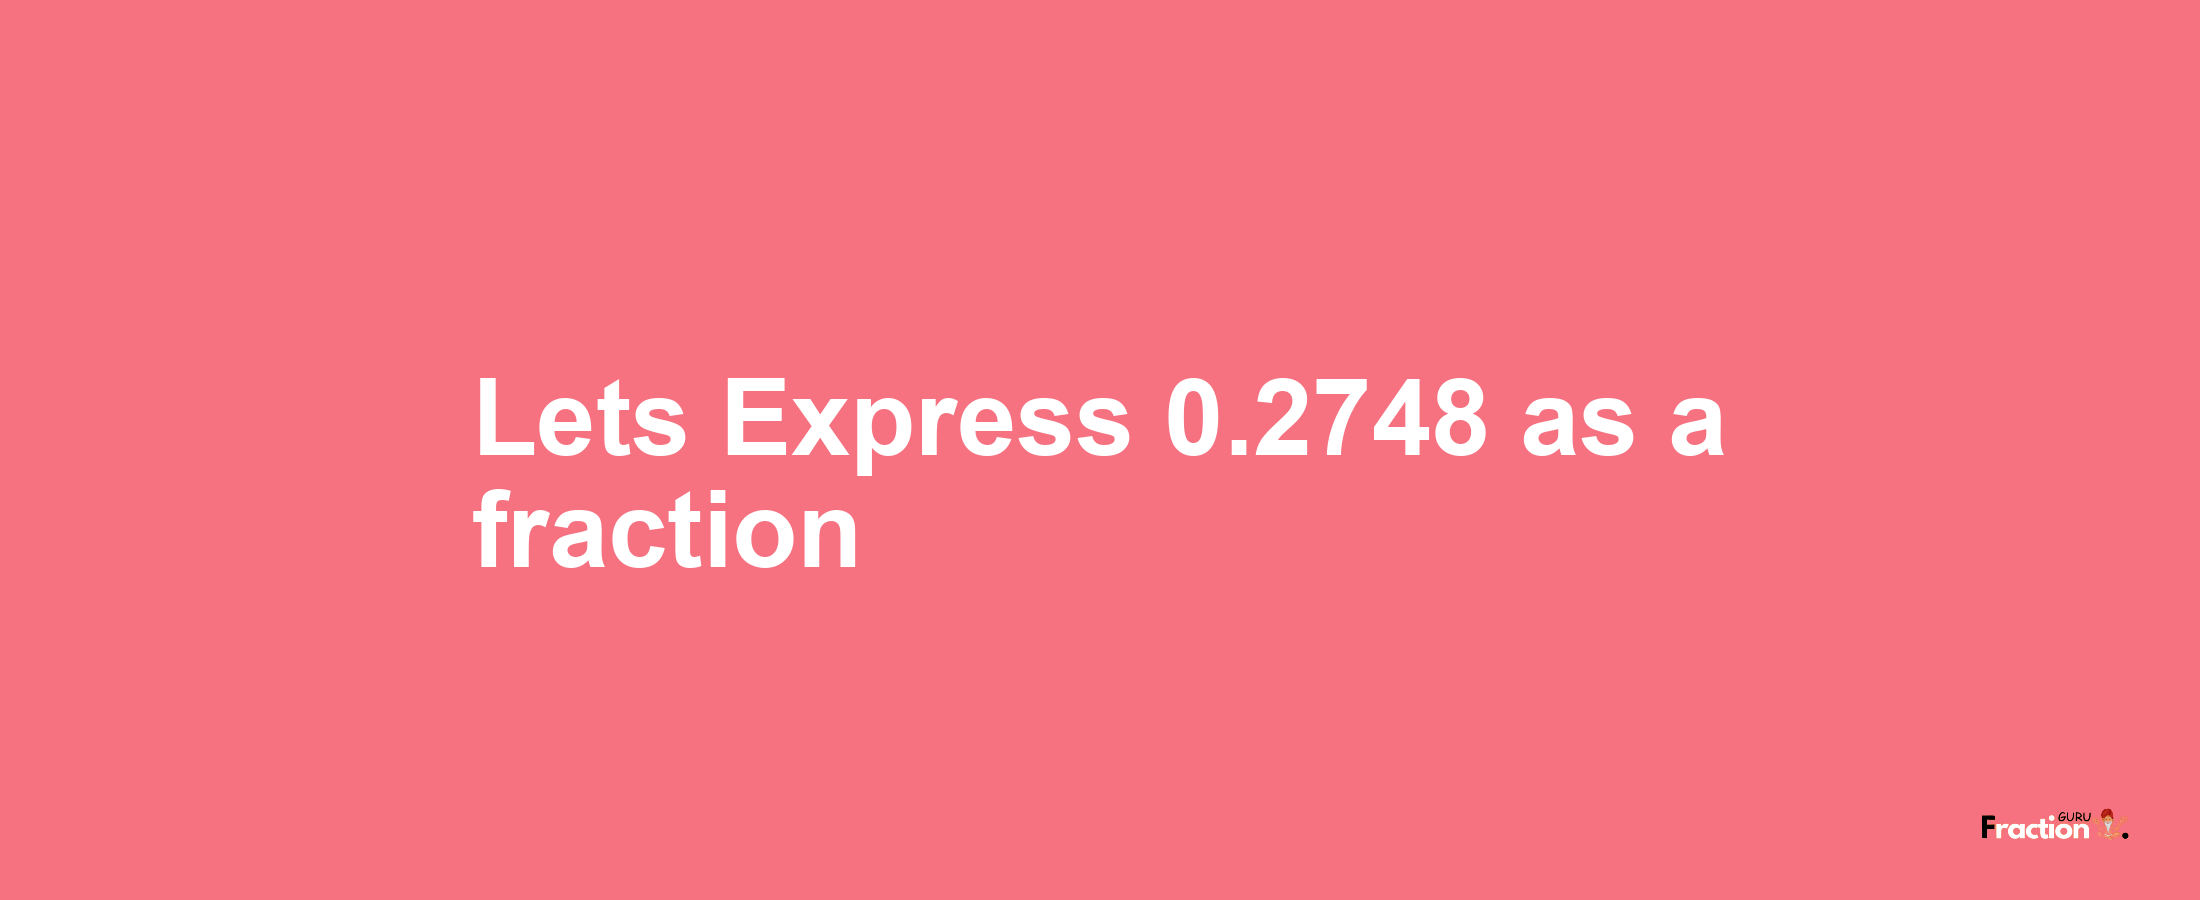 Lets Express 0.2748 as afraction